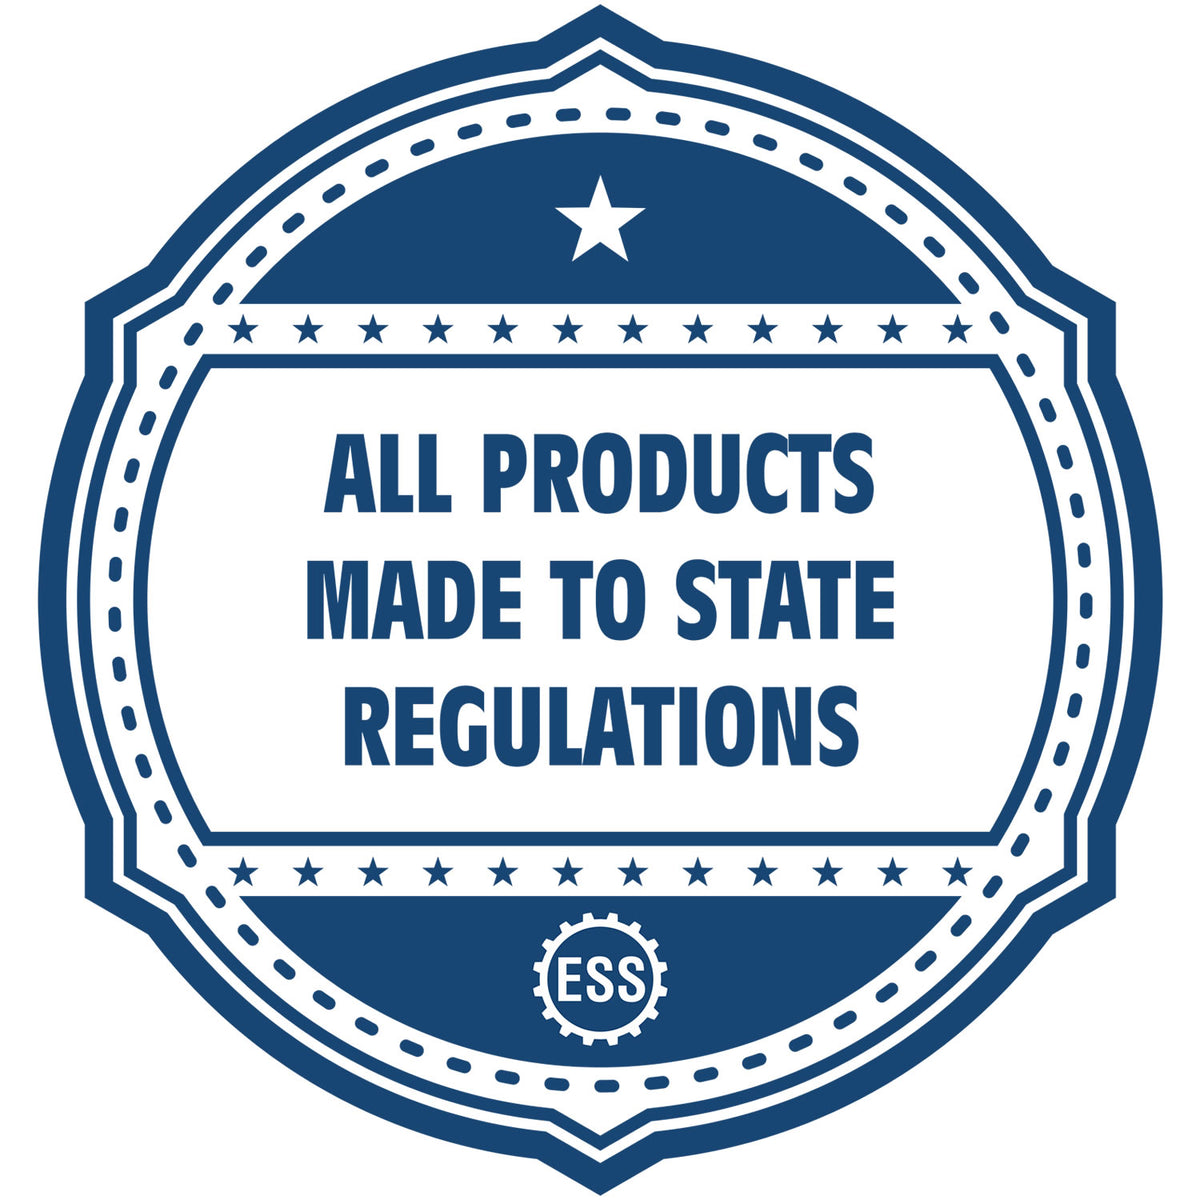 An icon or badge element for the State of North Dakota Long Reach Architectural Embossing Seal showing that this product is made in compliance with state regulations.